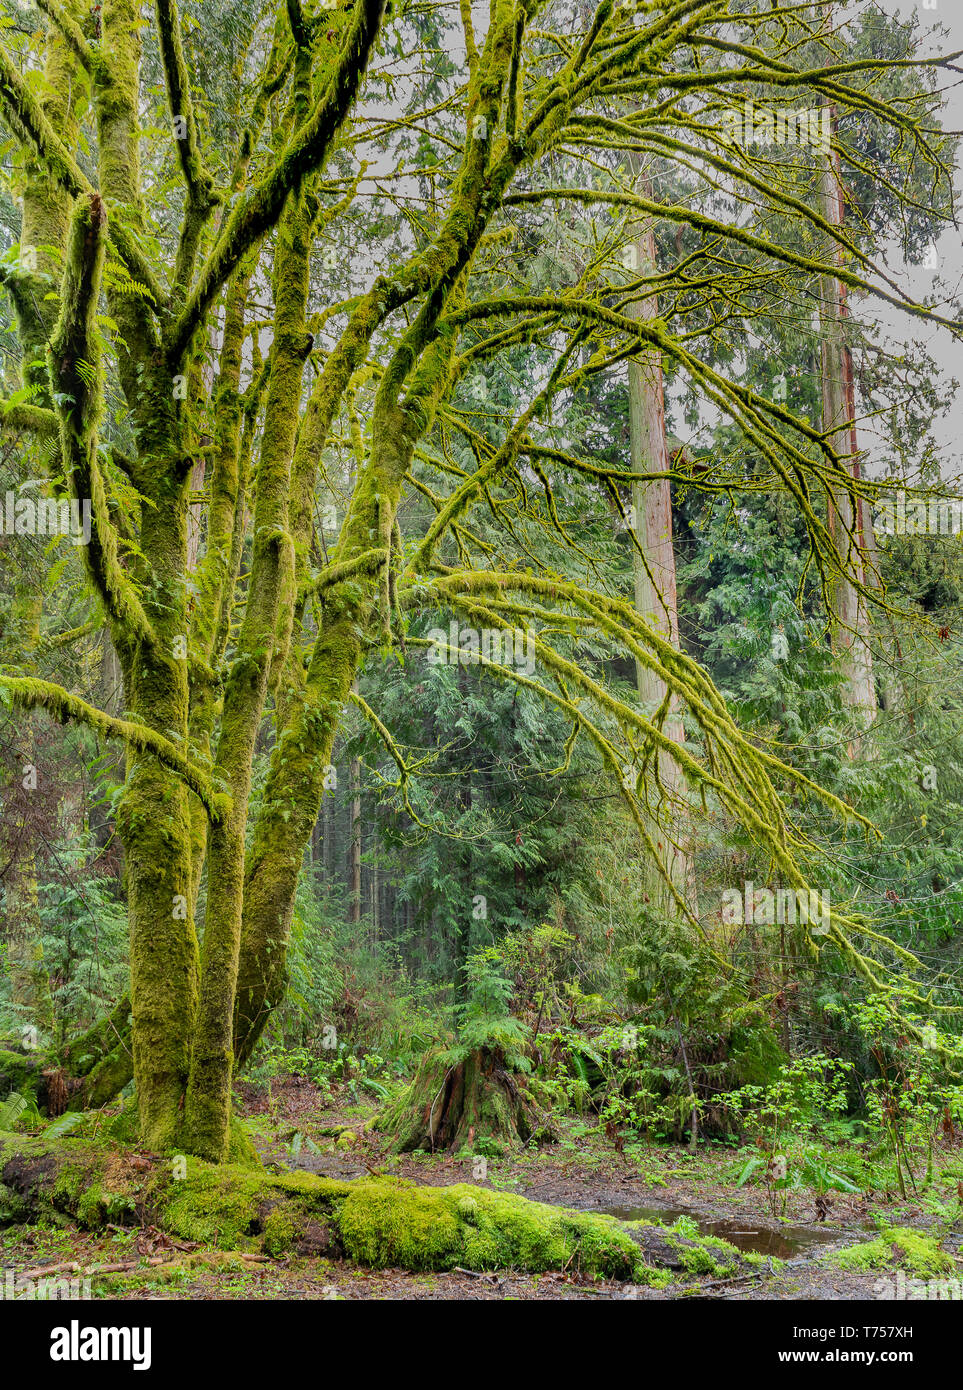 Groves of old-growth trees still dominate the temperate rainforests within Stanley Park near downtown Vancouver, BC, Canada. Stock Photo